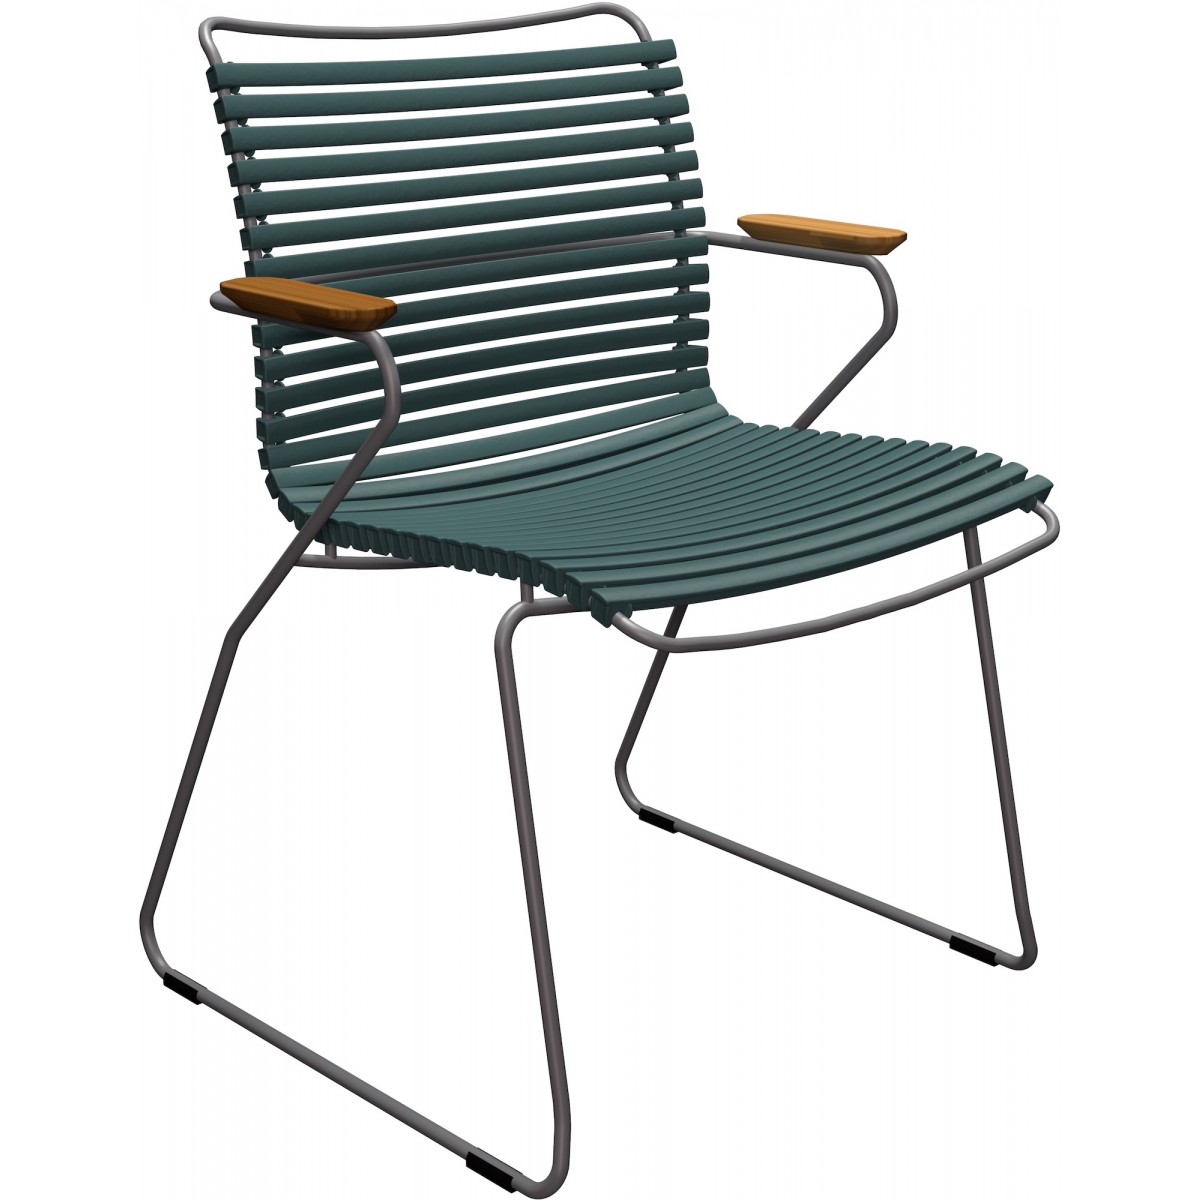 Pine green (11) - Click dining chair with armrests